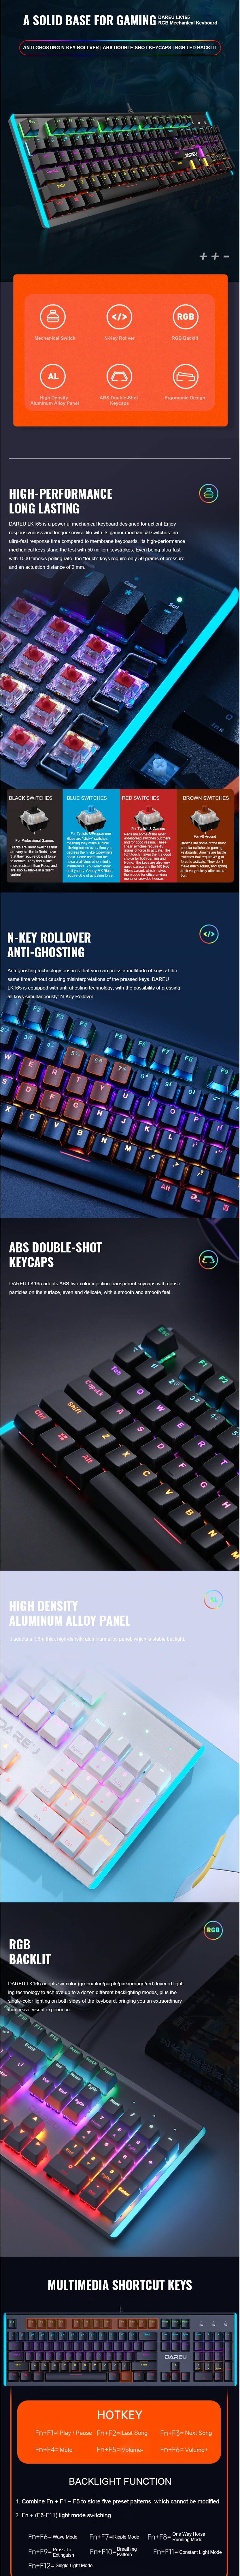 DAREU LK165 Full Size Wired Hybrid Color RGB Backlit Real Mechanical Gaming Keyboard with N-Key Rollover & ABS Double-Shot Keycaps